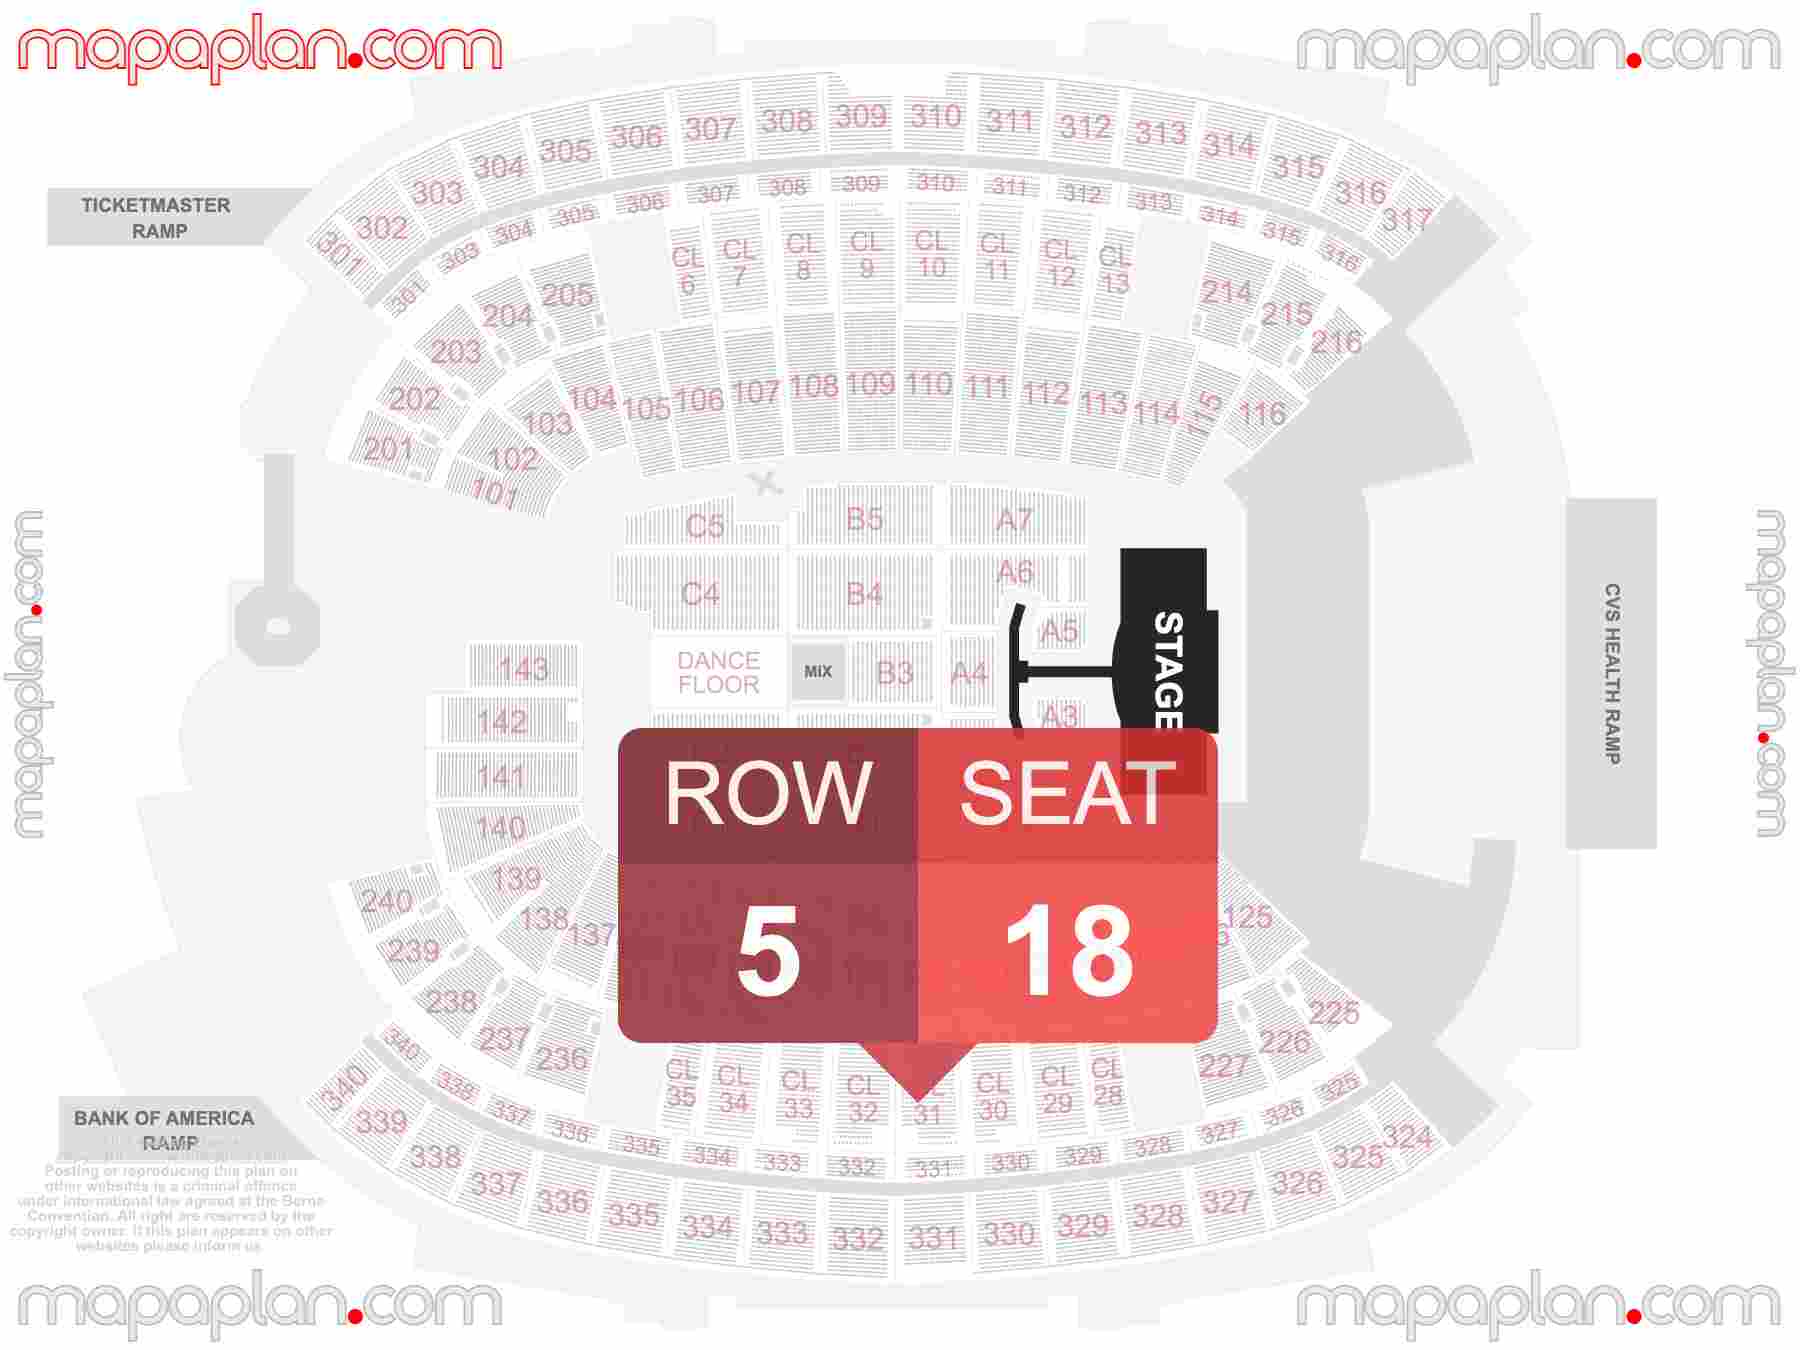 Foxborough Gillette Stadium seating chart Concert detailed seat numbers and row numbering chart with interactive map plan layout